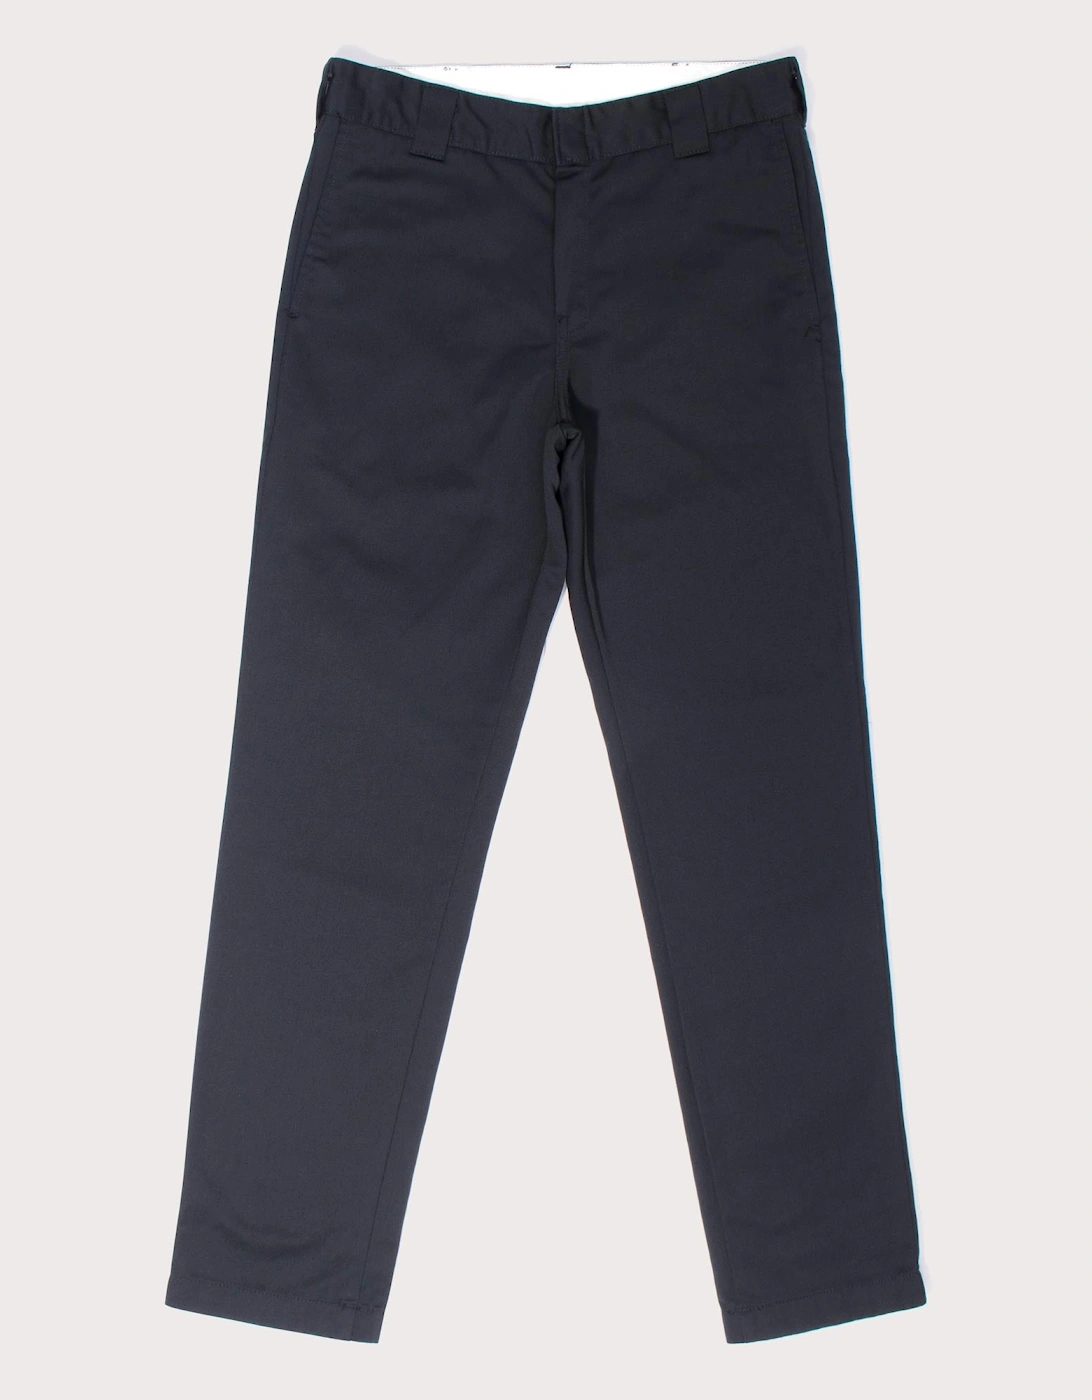 Relaxed Fit Master Pants